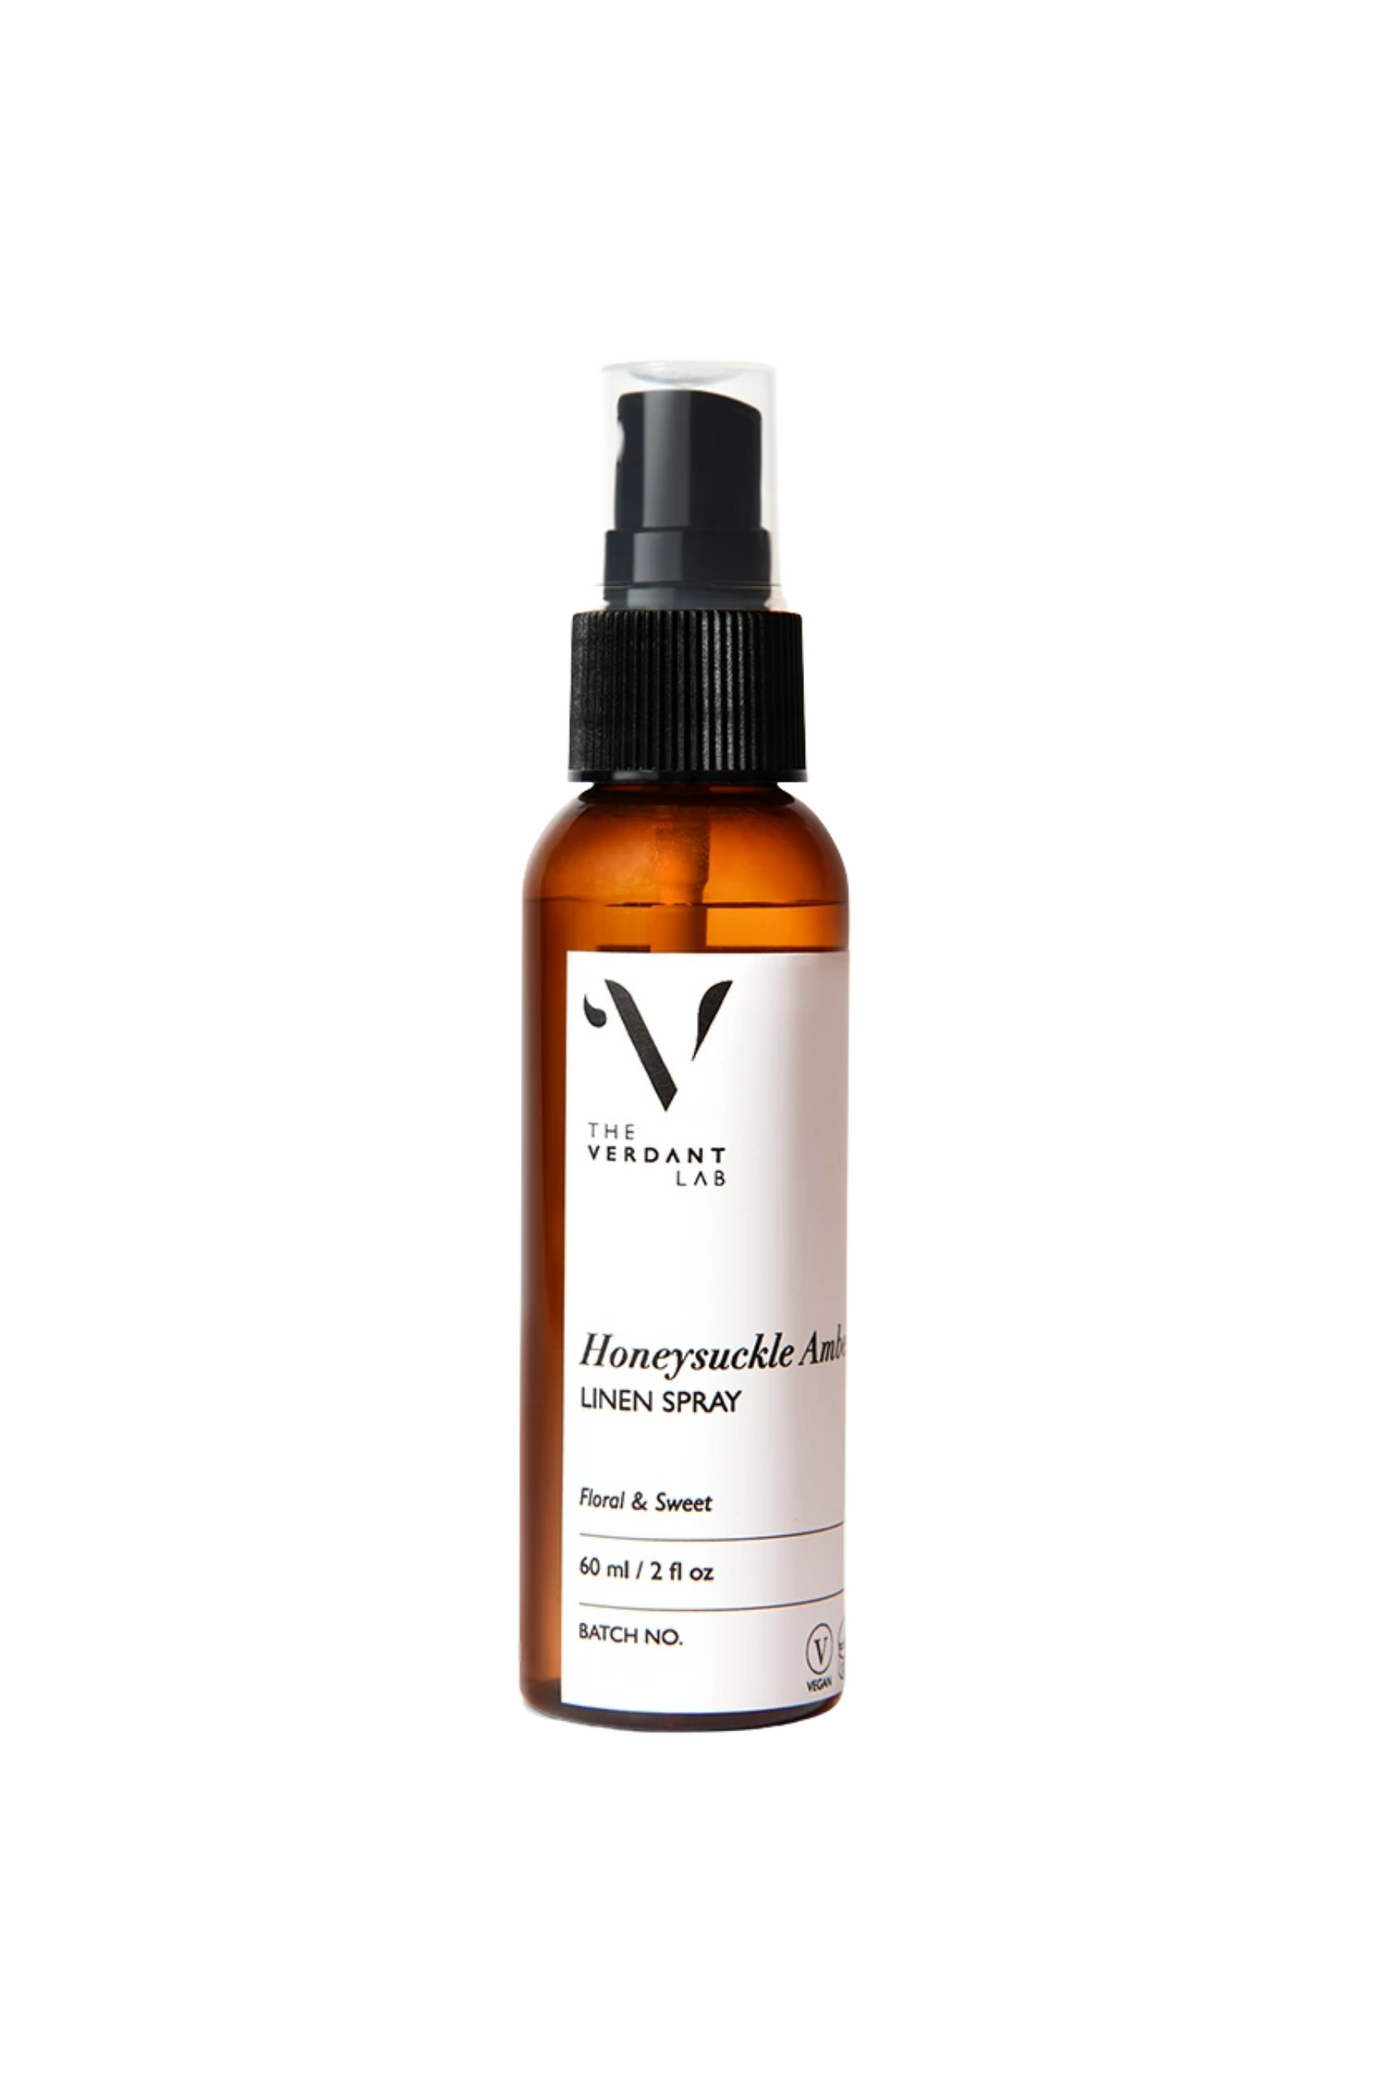 The Verdant Lab Linen Spray in Honeysuckle Amber, available on ZERRIN with free Singapore shipping above $50